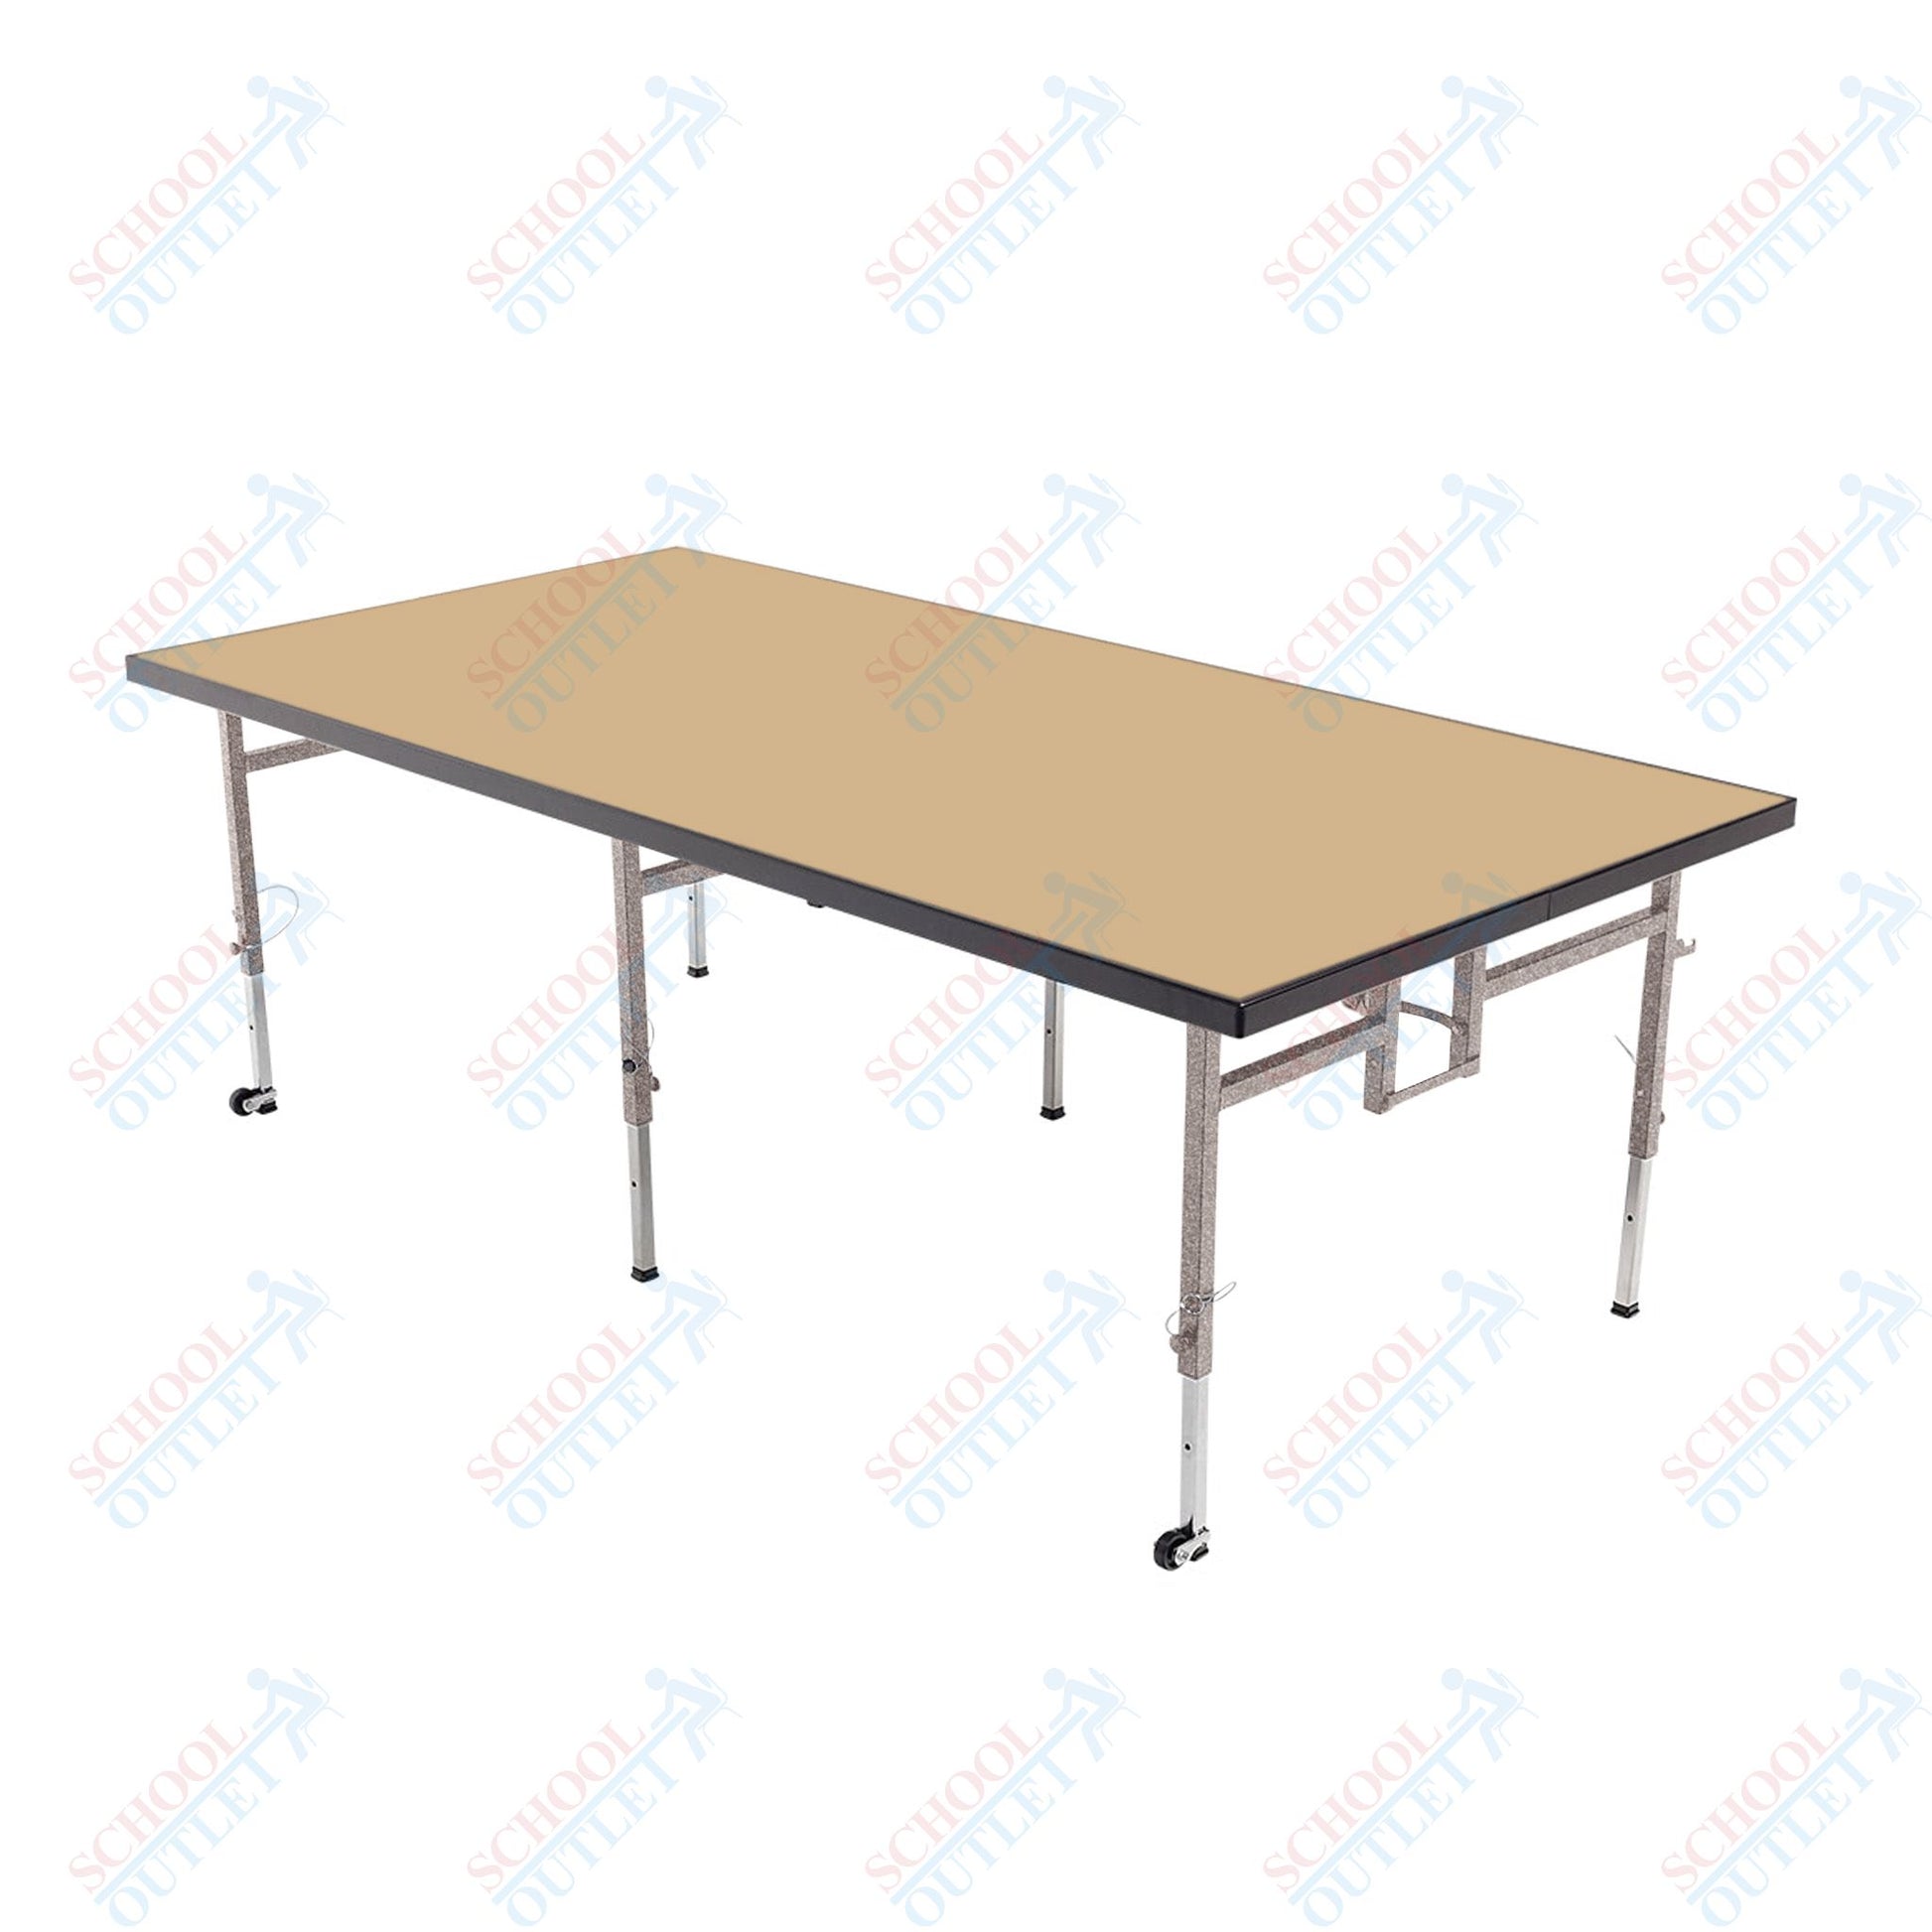 AmTab Adjustable Height Stage - Carpet Top - 36"W x 48"L x Adjustable 24" to 32"H (AmTab AMT-STA3424C) - SchoolOutlet